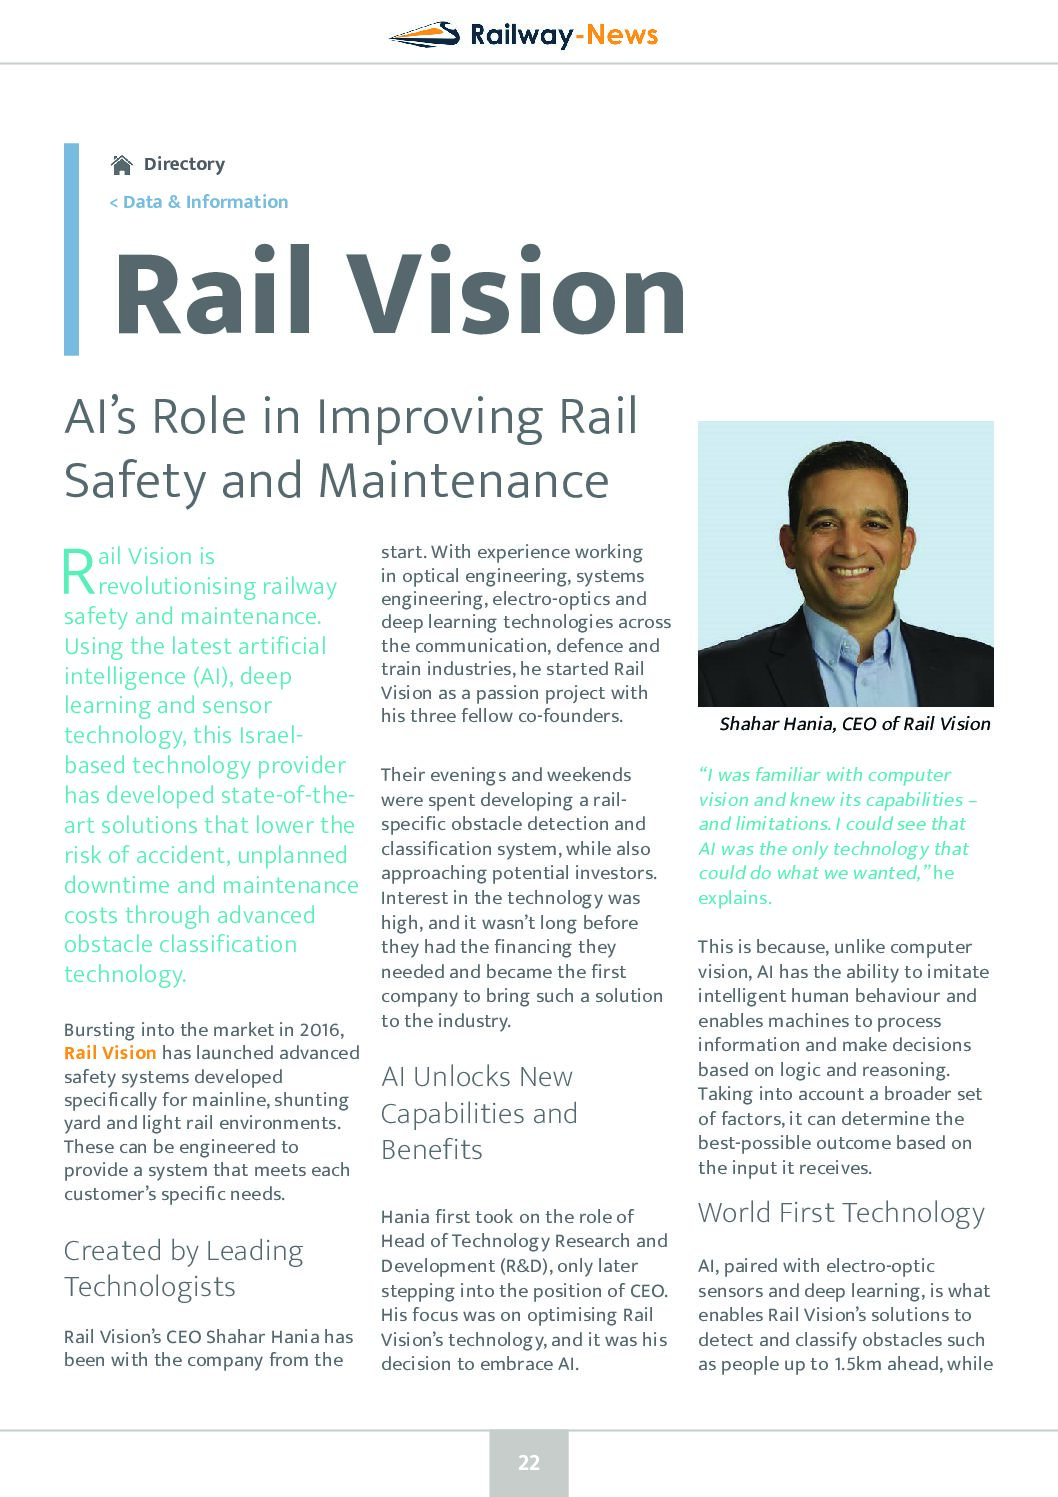 AI’s Role in Improving Rail Safety and Maintenance